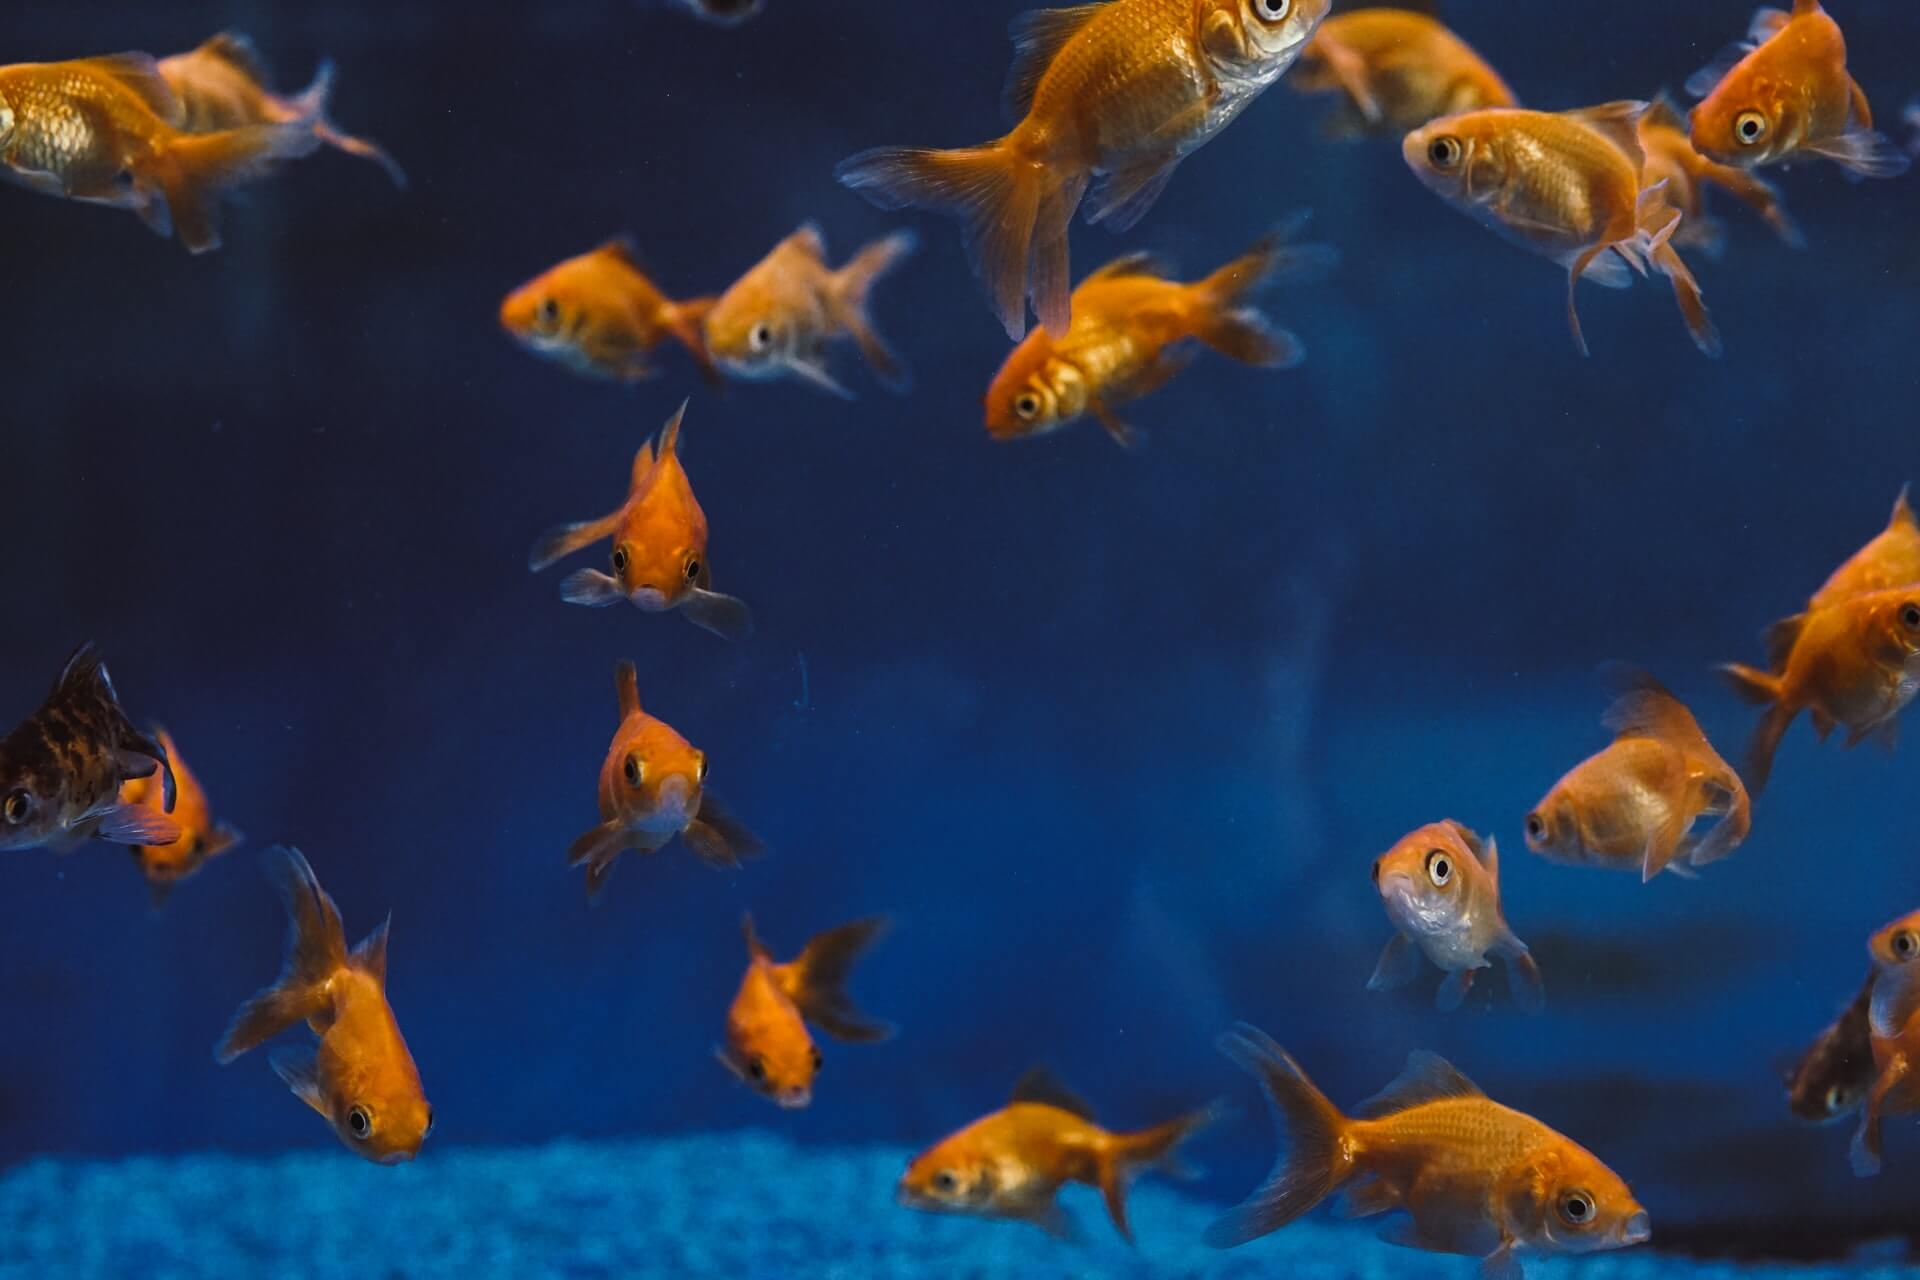 Yes, Fish Can Communicate Acoustically